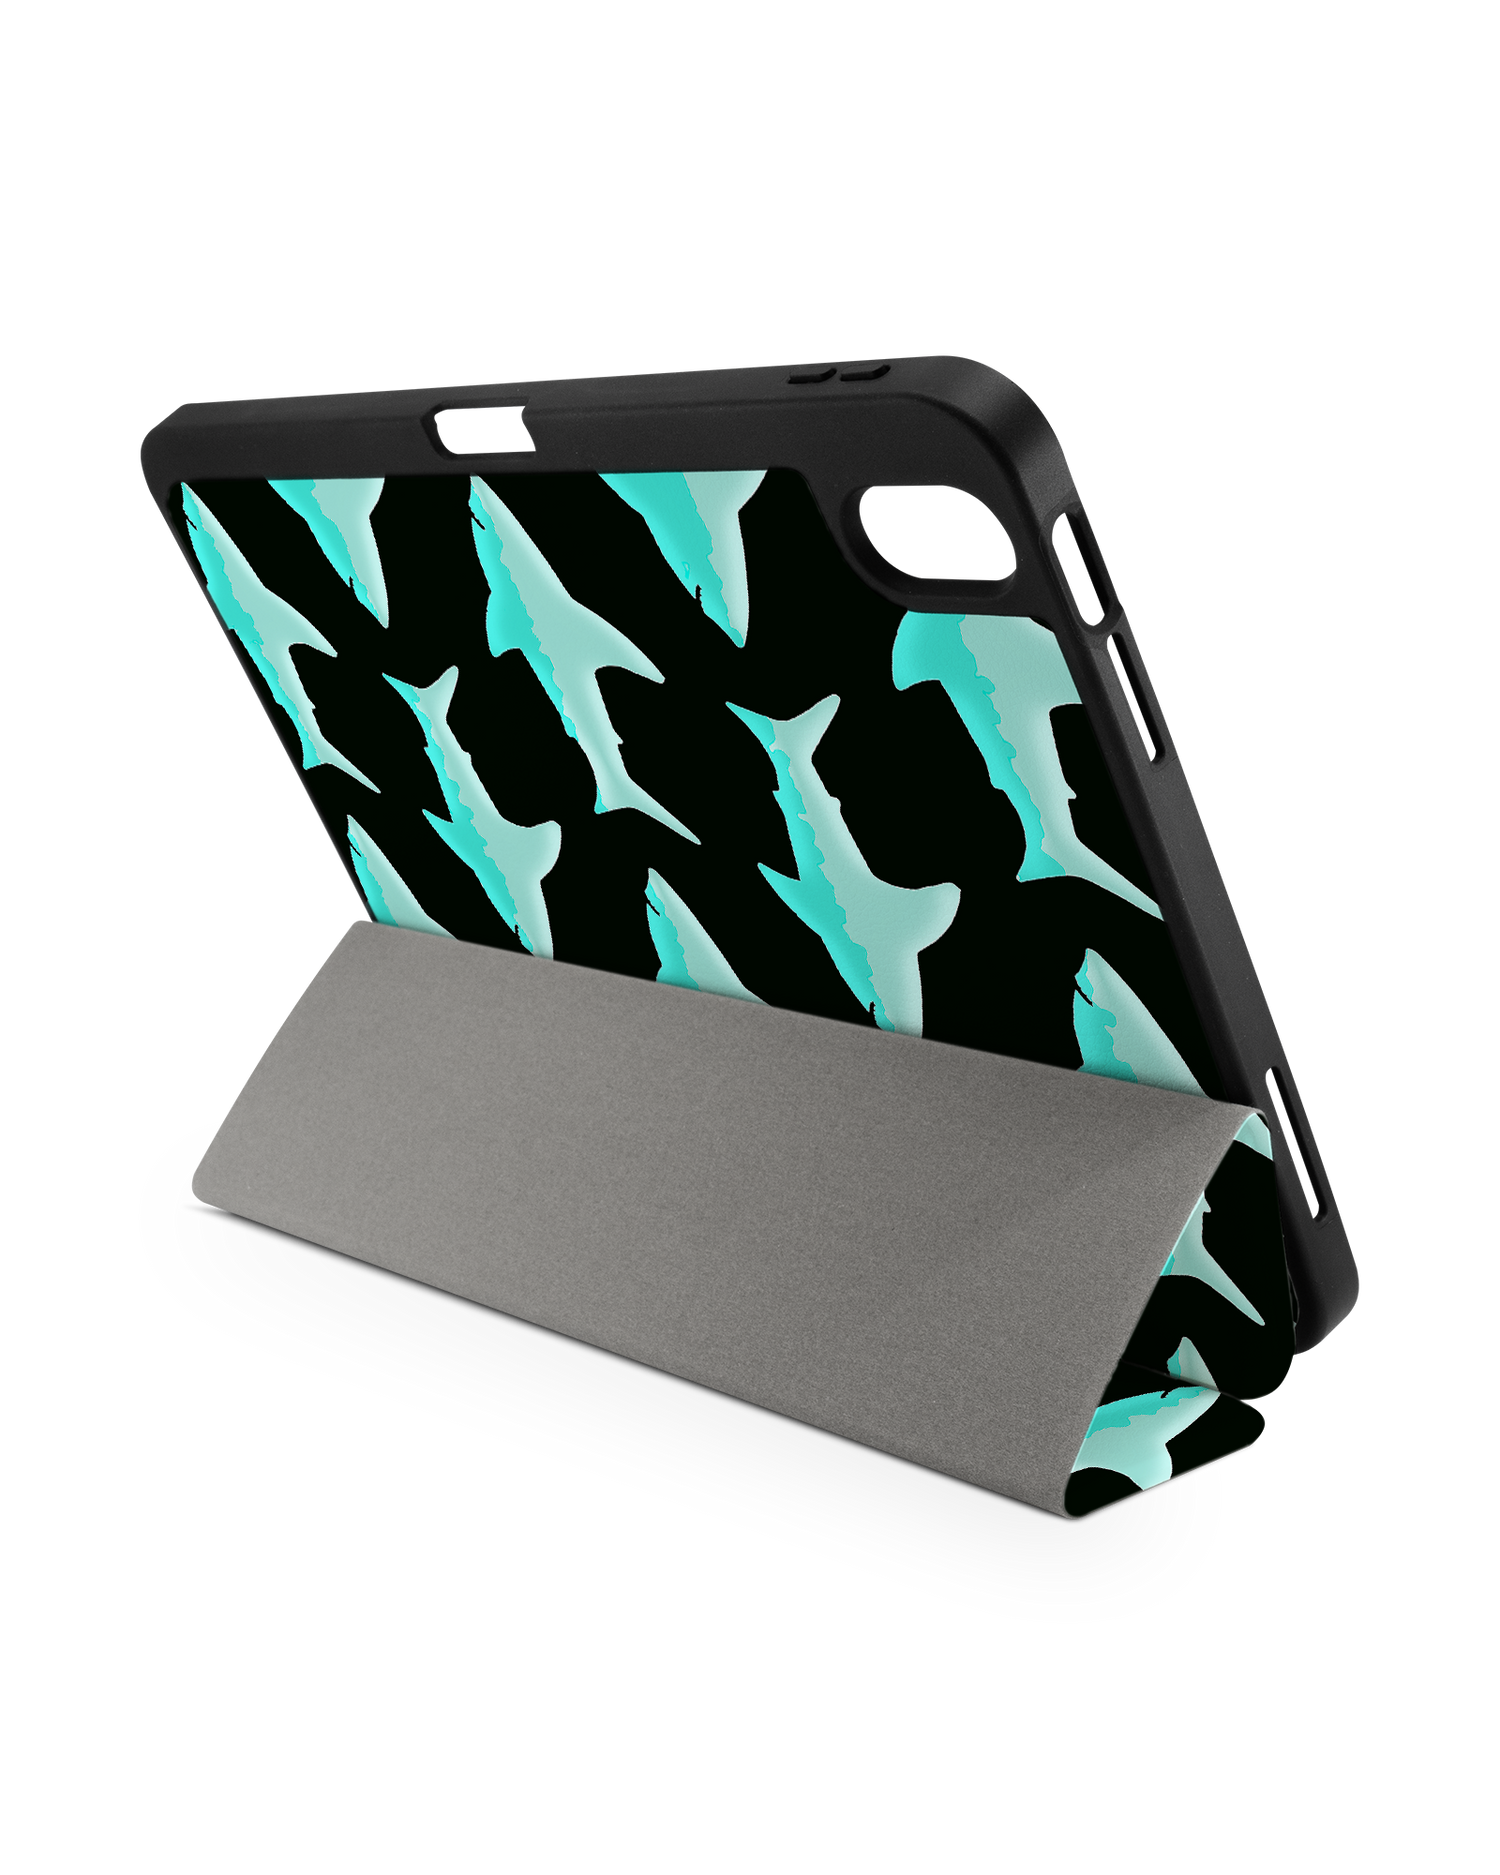 Neon Sharks iPad Case with Pencil Holder for Apple iPad (10th Generation): Set up in landscape format (back view)